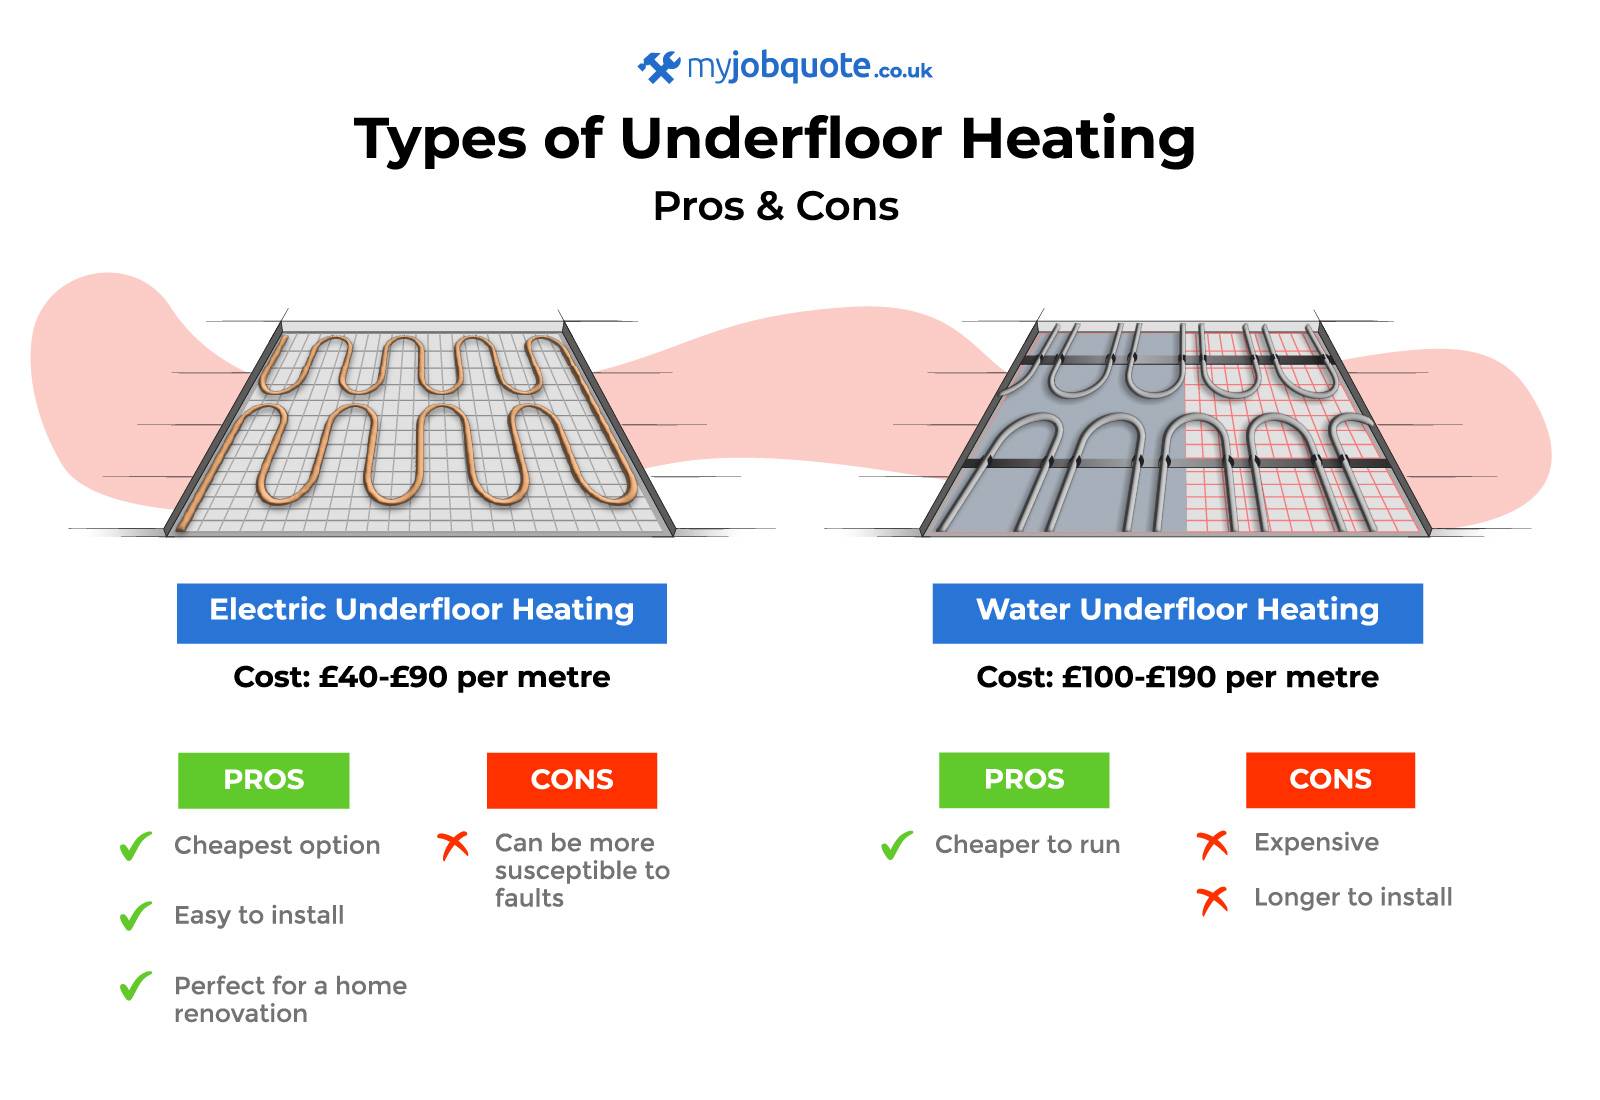 pros and cons of underfloor heating graphic